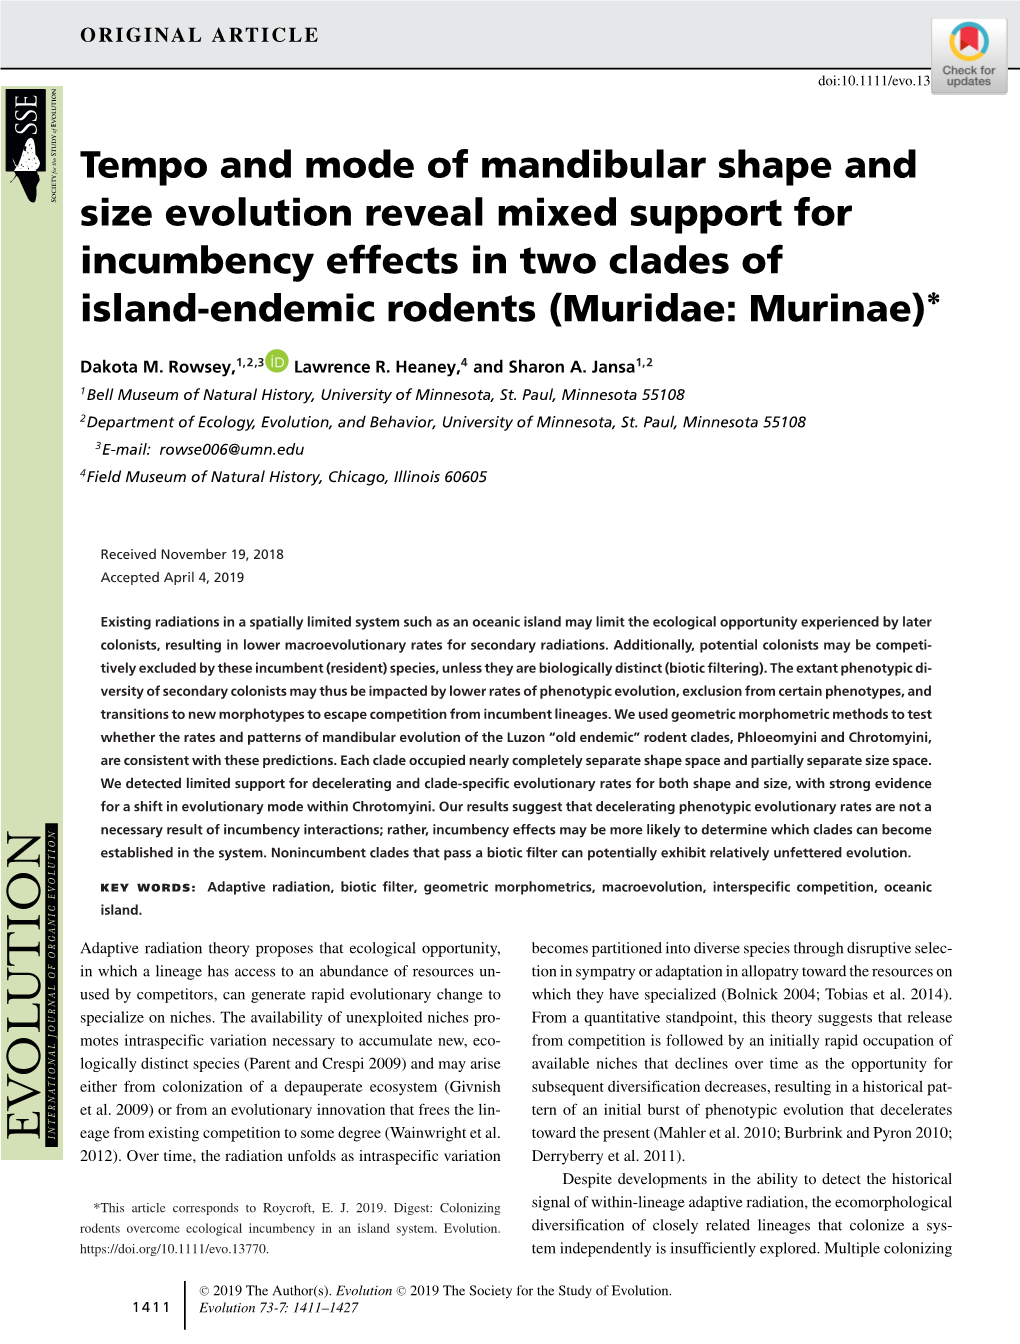 Tempo and Mode of Mandibular Shape and Size Evolution Reveal Mixed Support for Incumbency Effects in Two Clades of ∗ Island-Endemic Rodents (Muridae: Murinae)